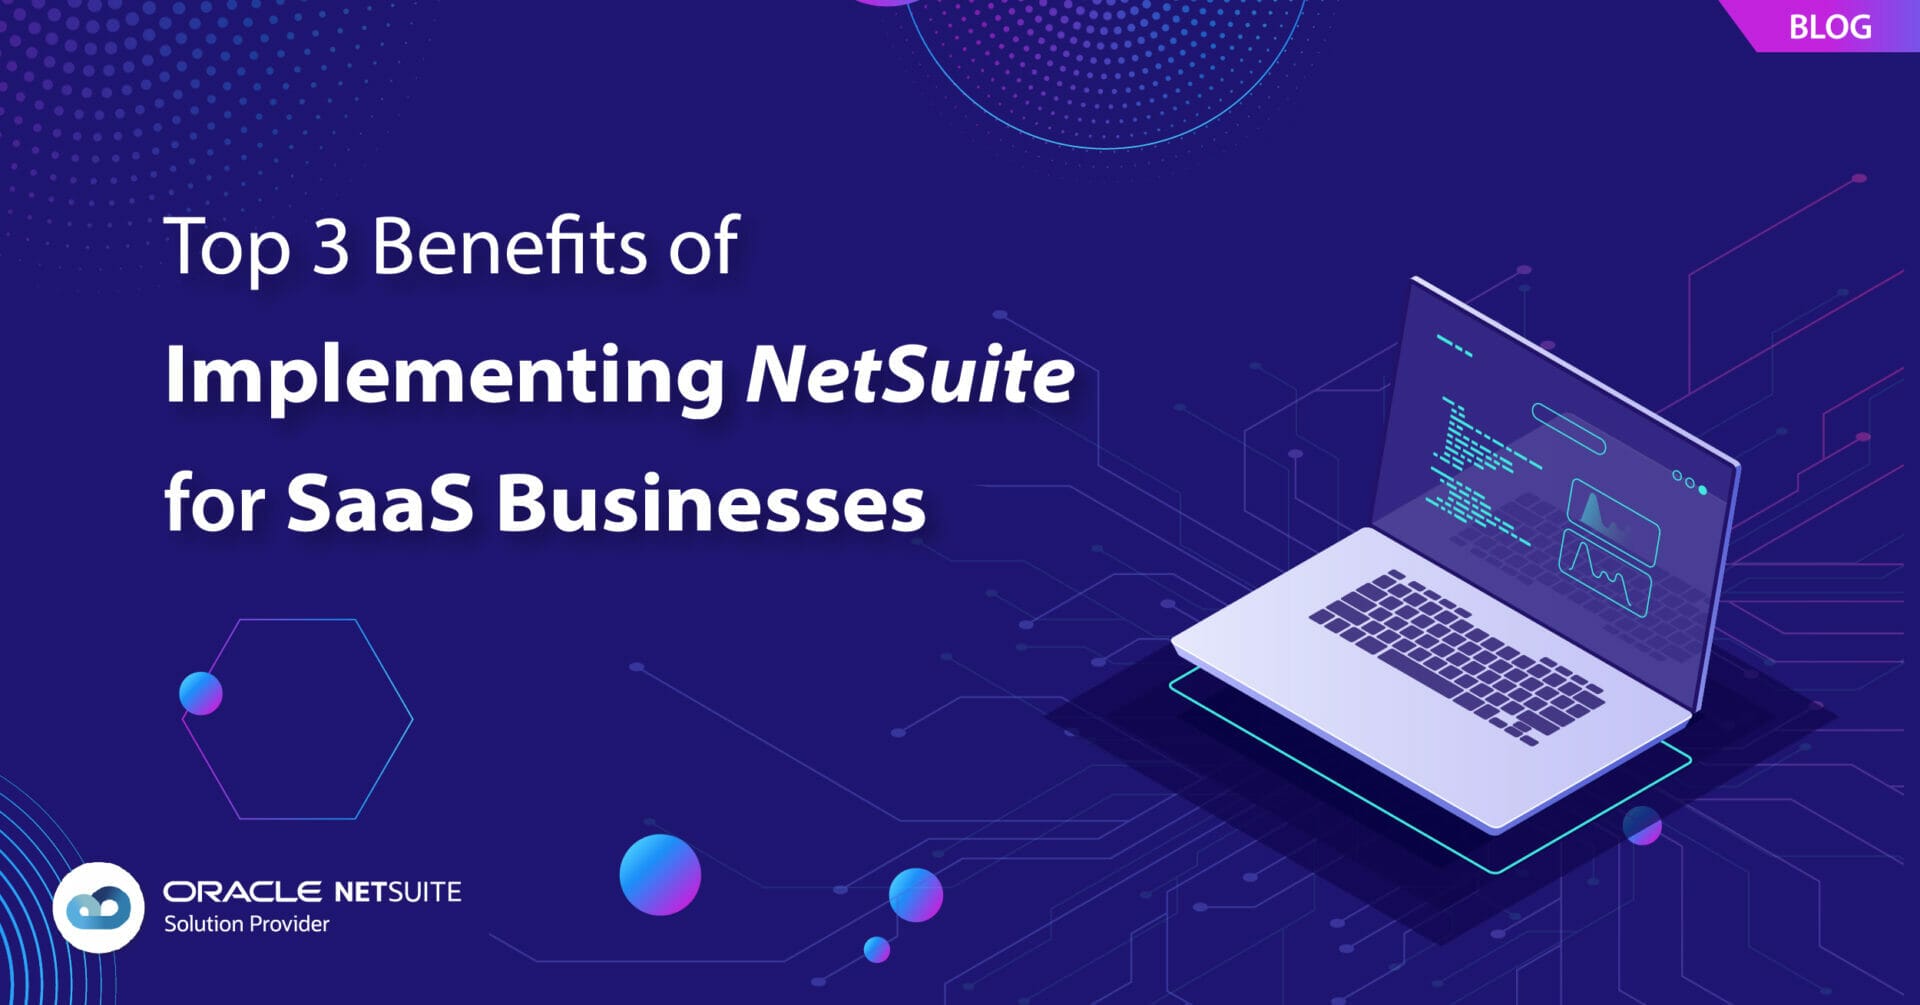 Top 3 Benefits of Implementing NetSuite for SaaS Businesses